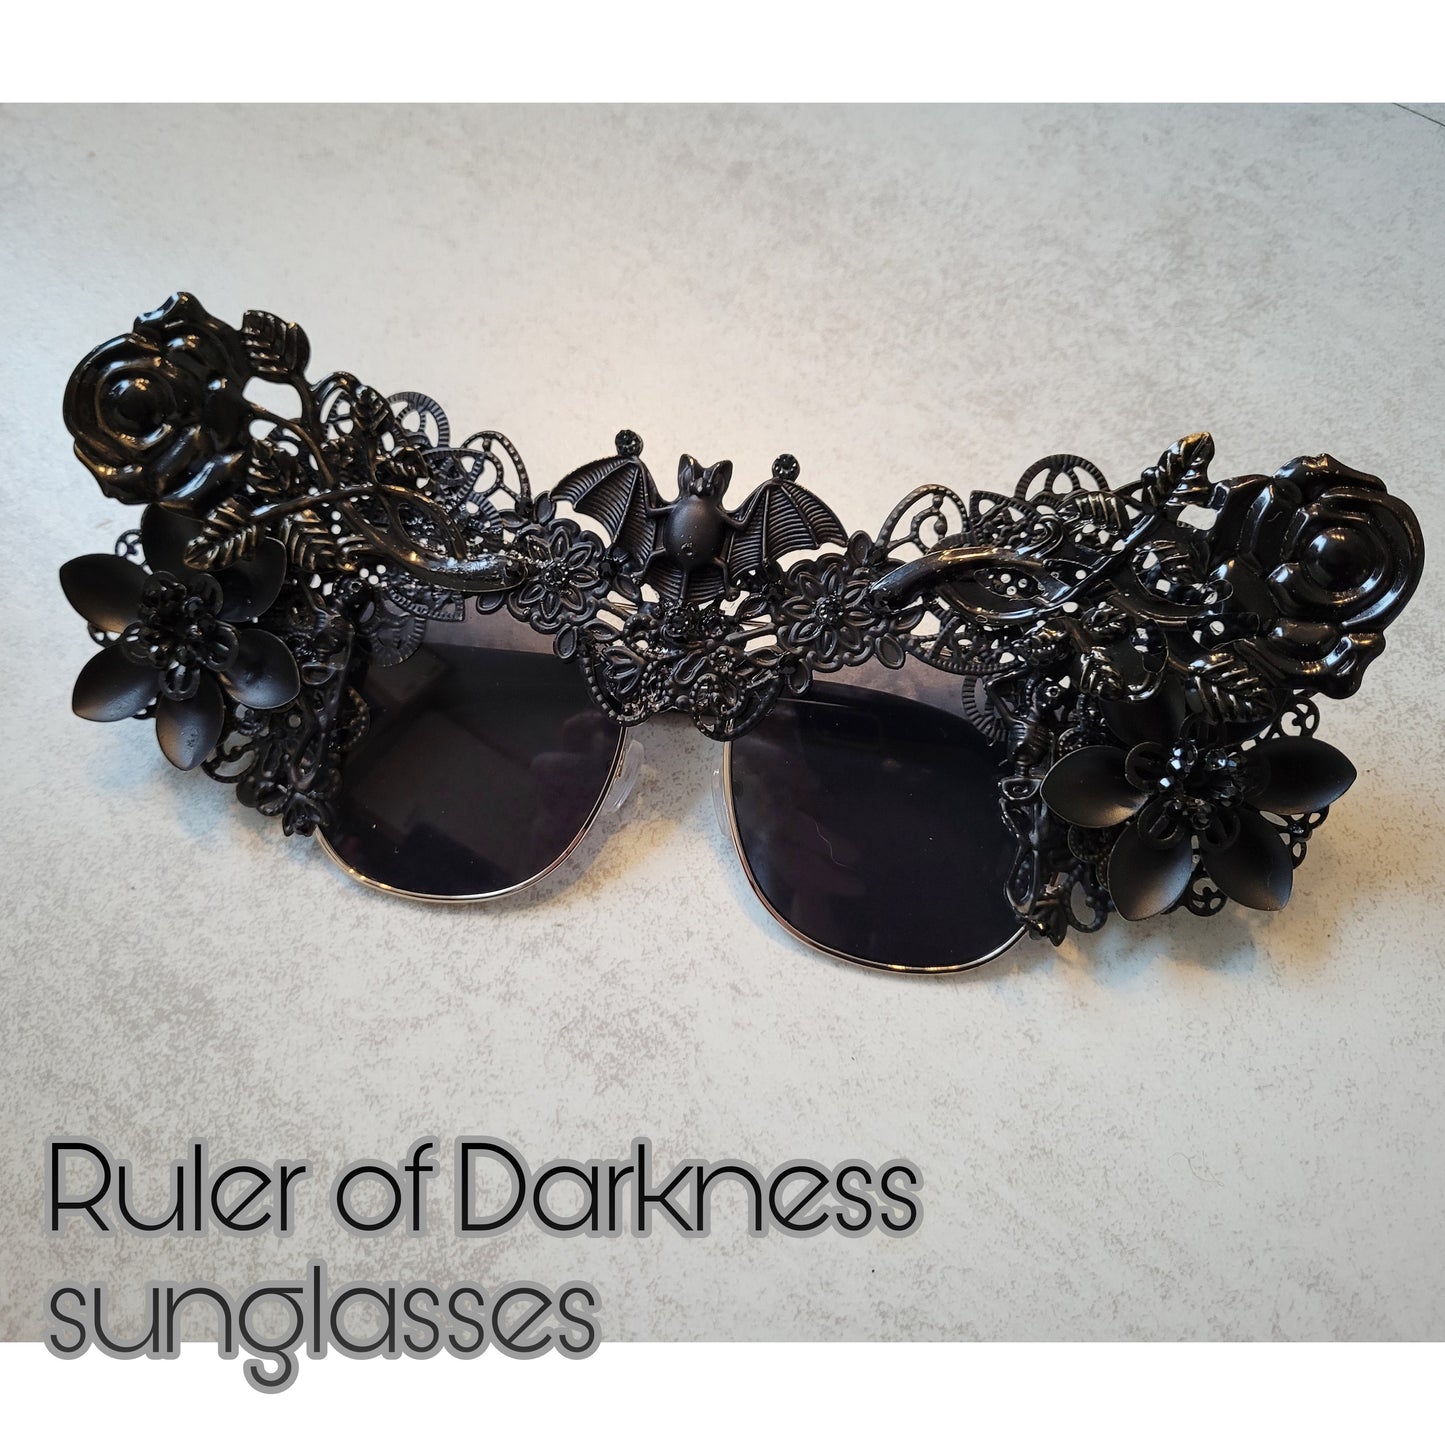 Midnight Garden Collection: The Ruler of Darkness Sunglasses